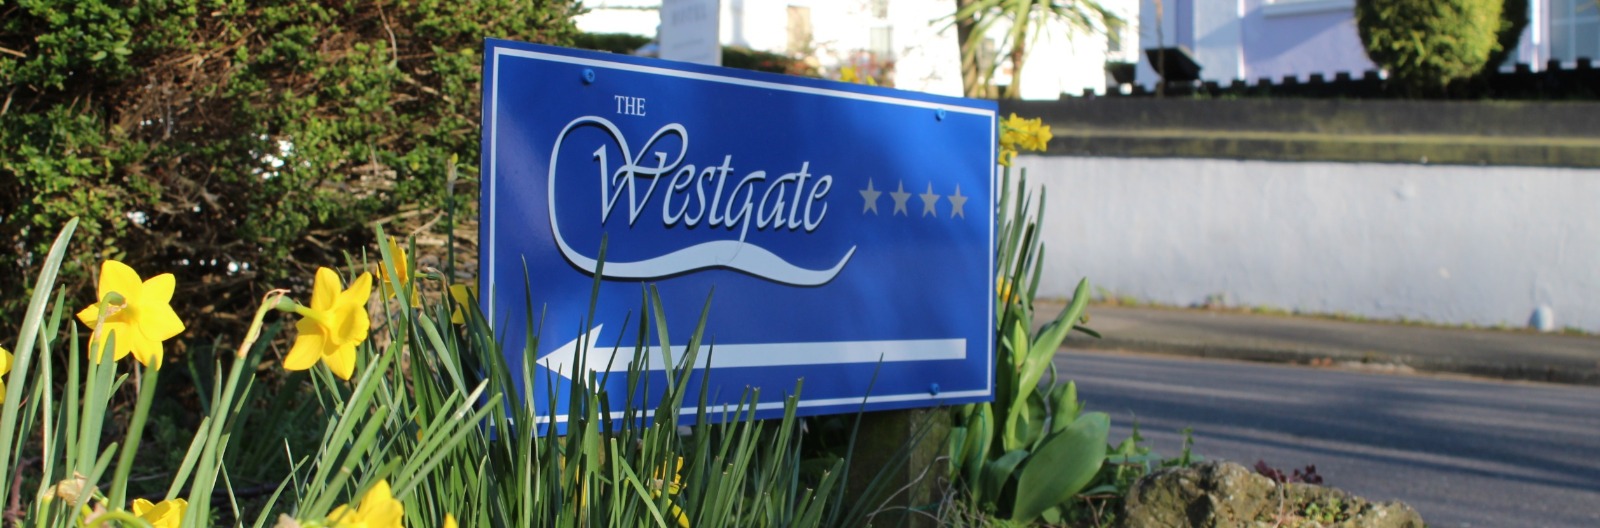 Facilities at The Westgate Hotel